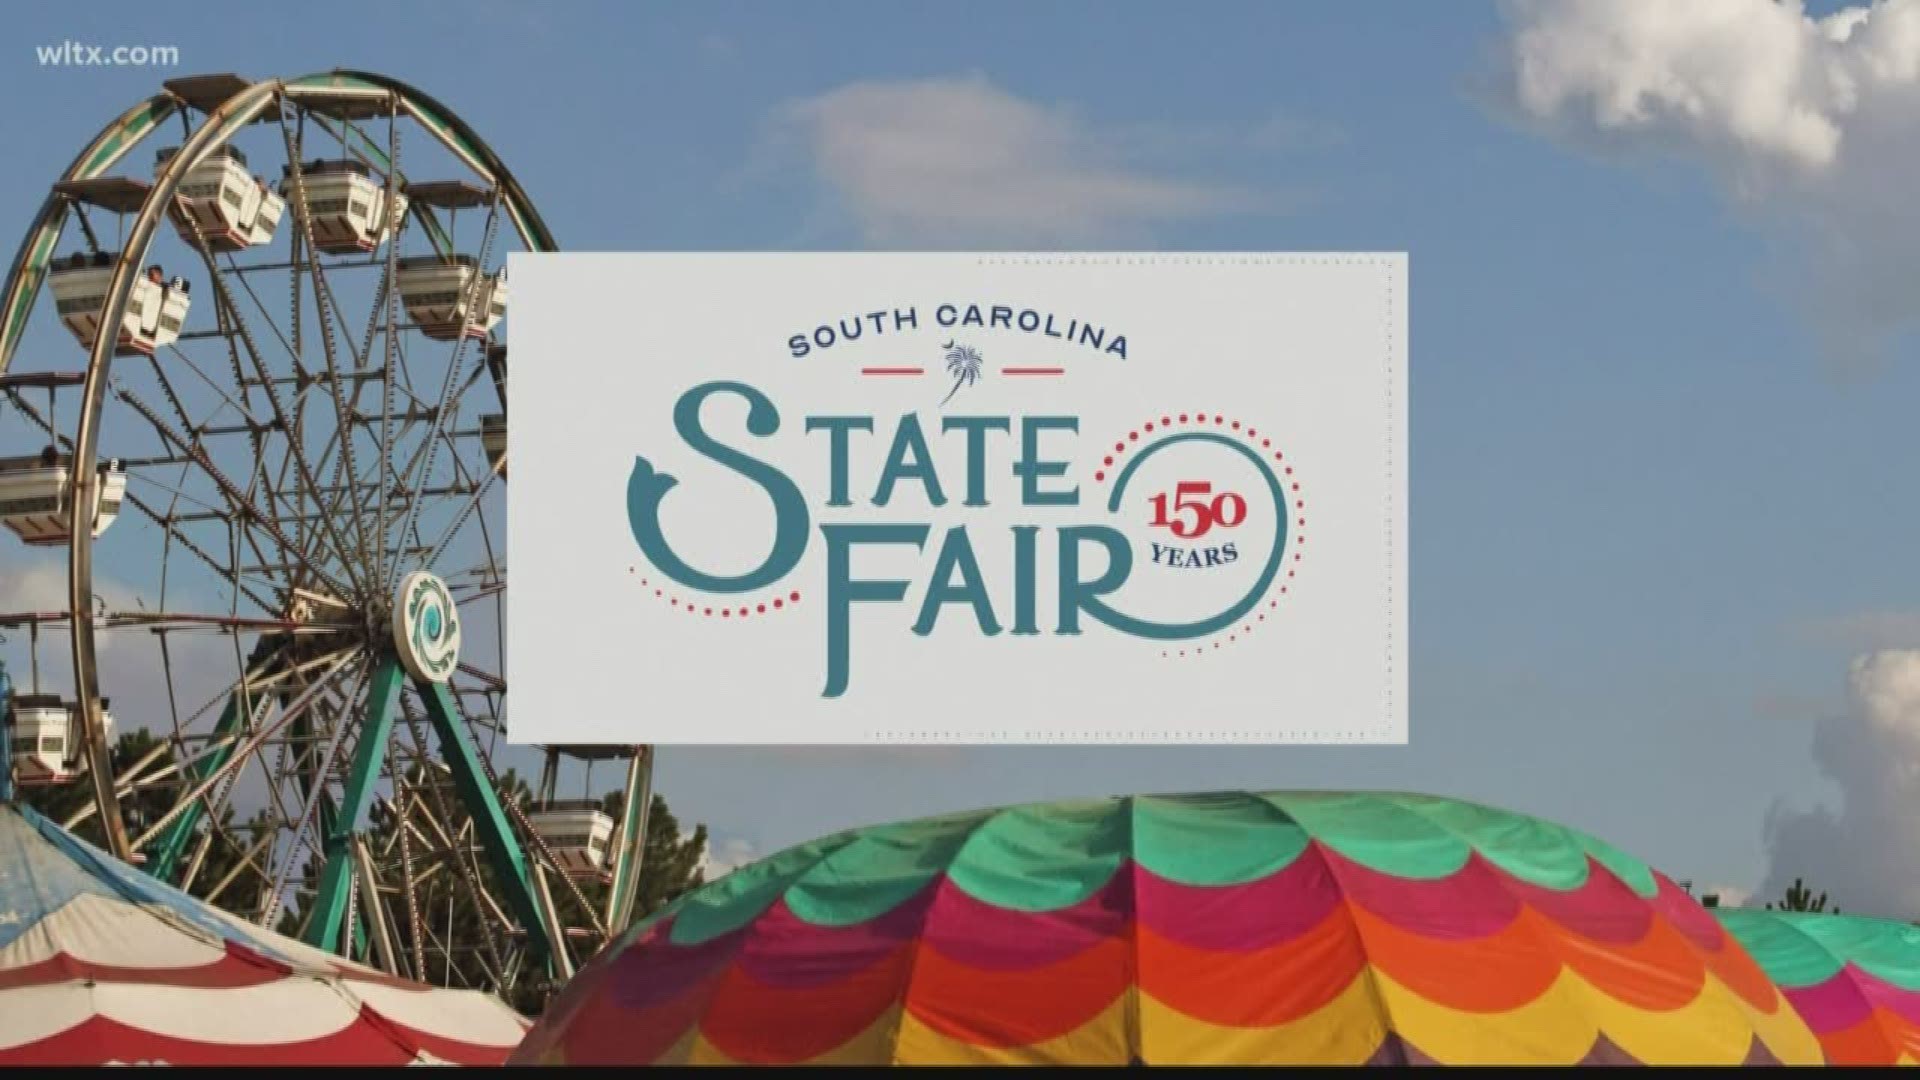 More than 400,000 attend 2019 S.C. State Fair